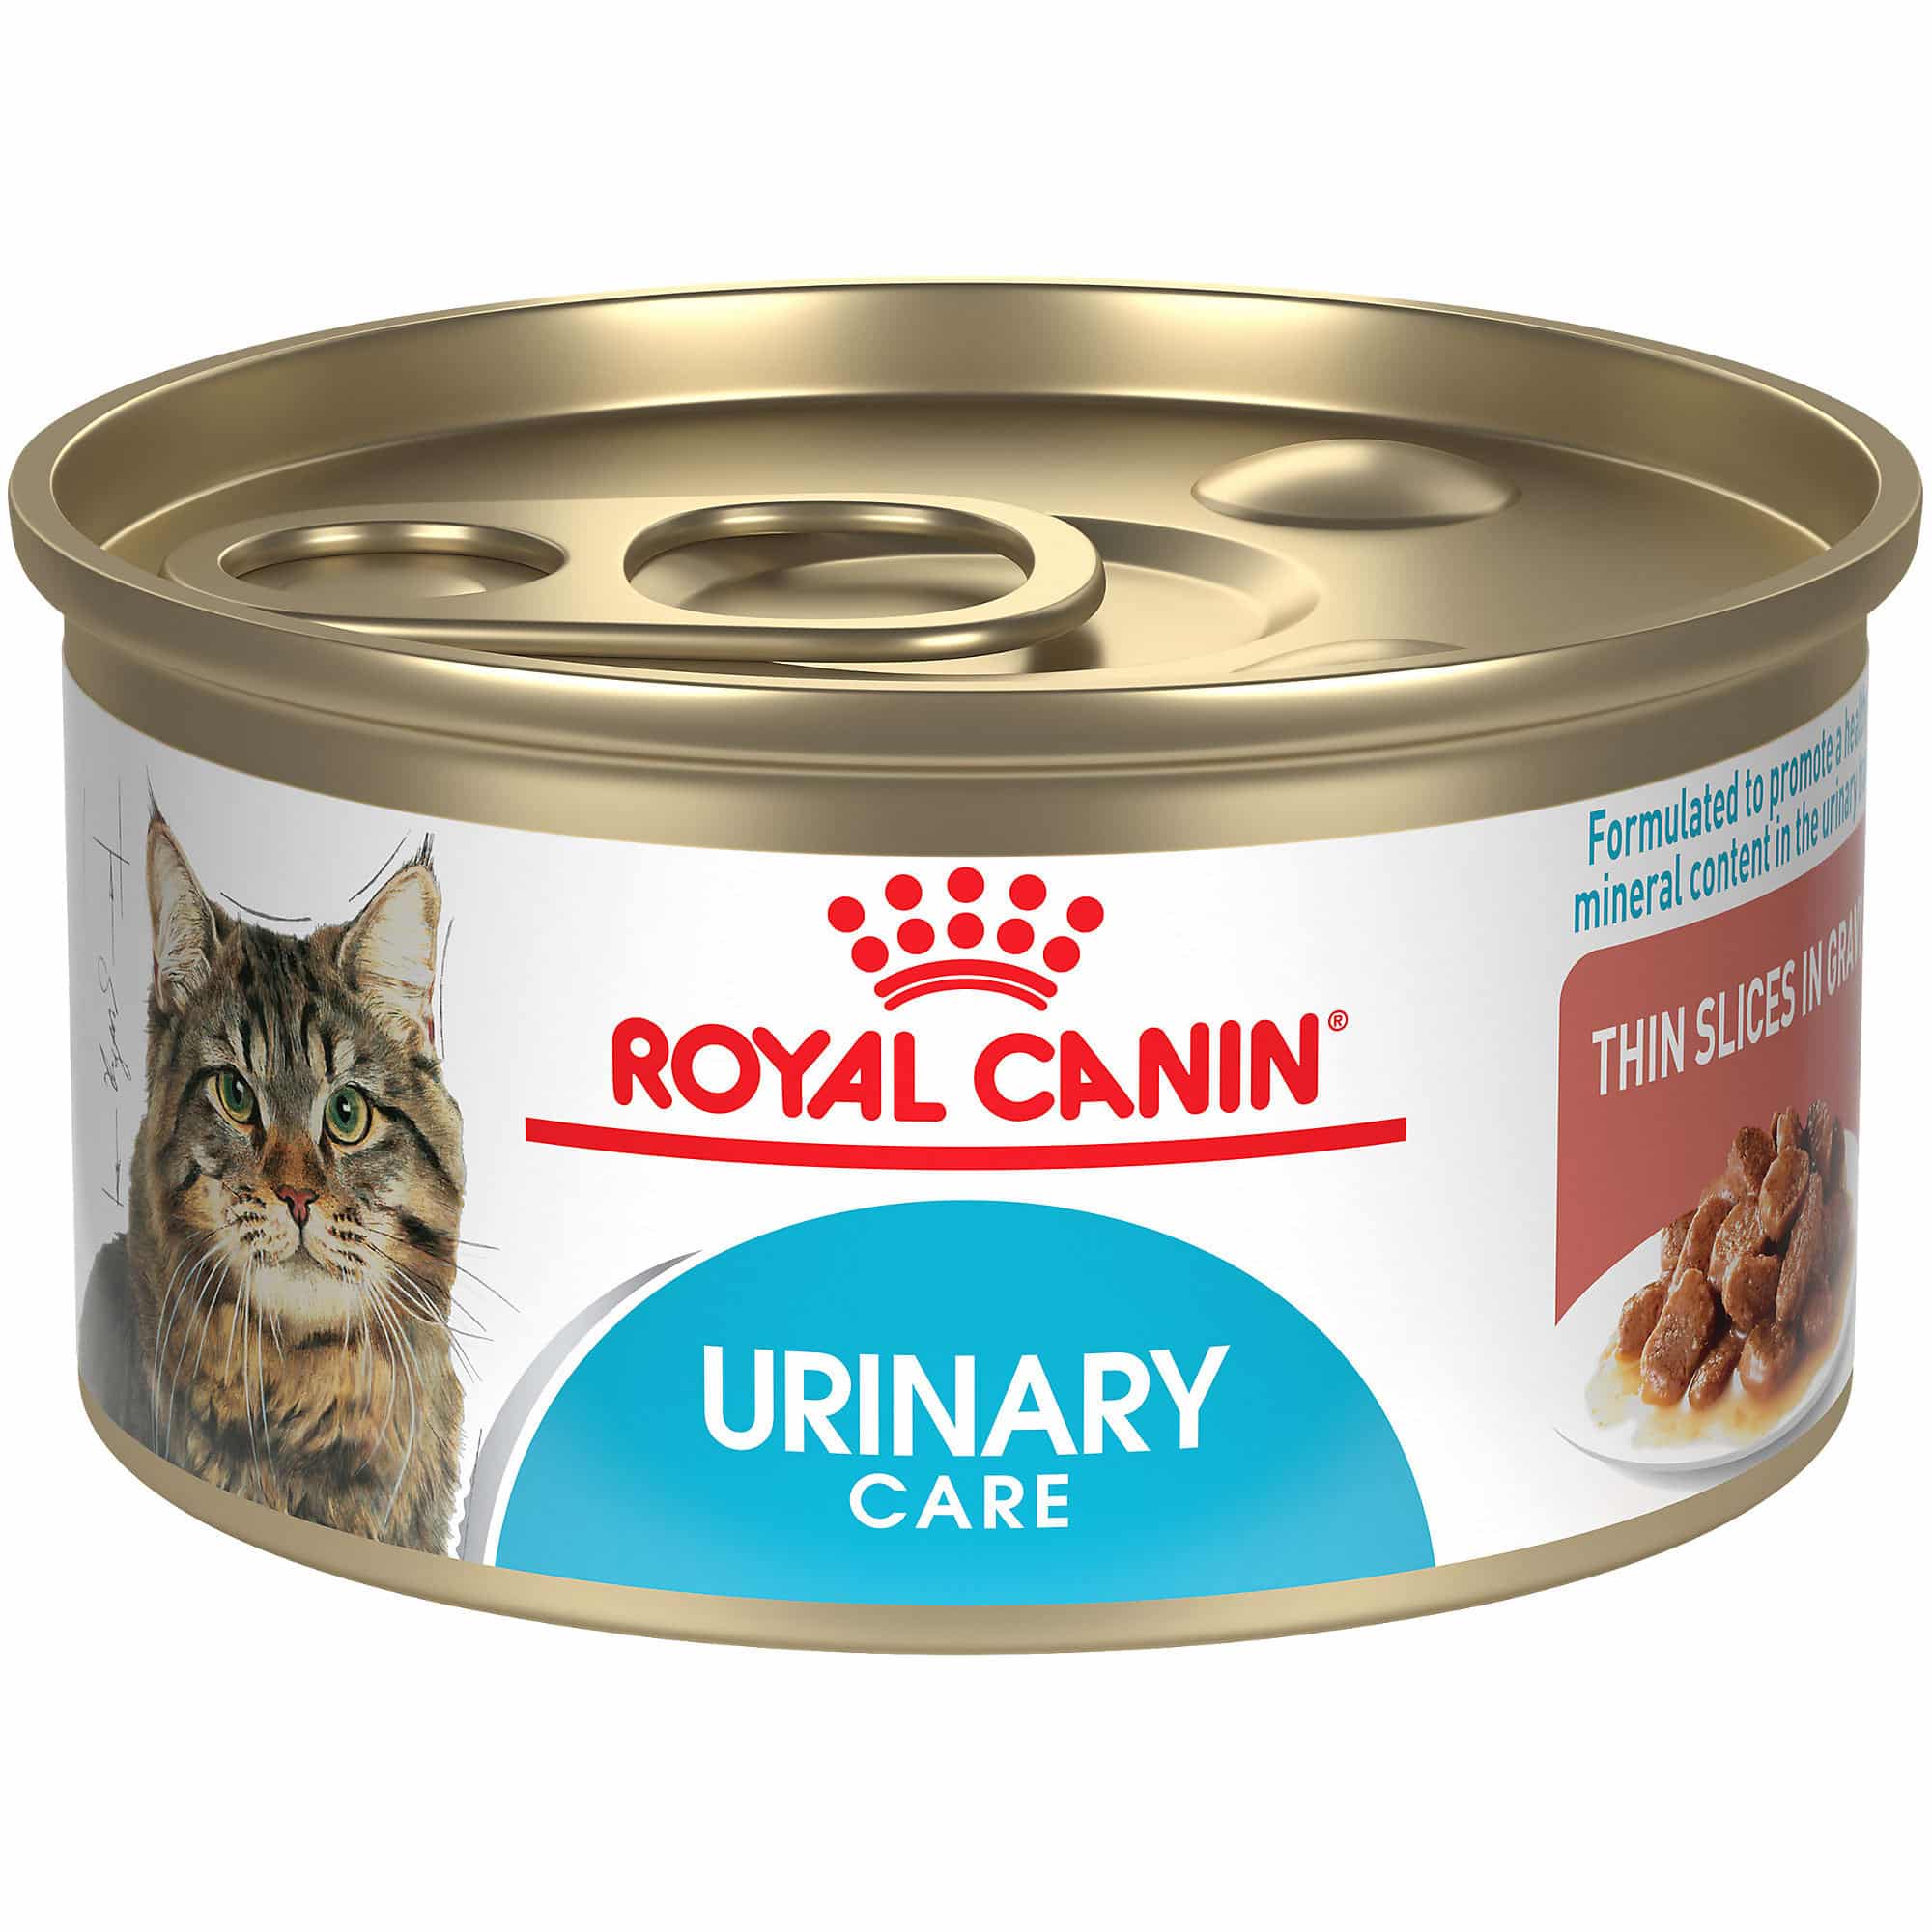 Royal Canin Feline Urinary Care Thin Slices in Gravy Adult Wet Cat Food ...